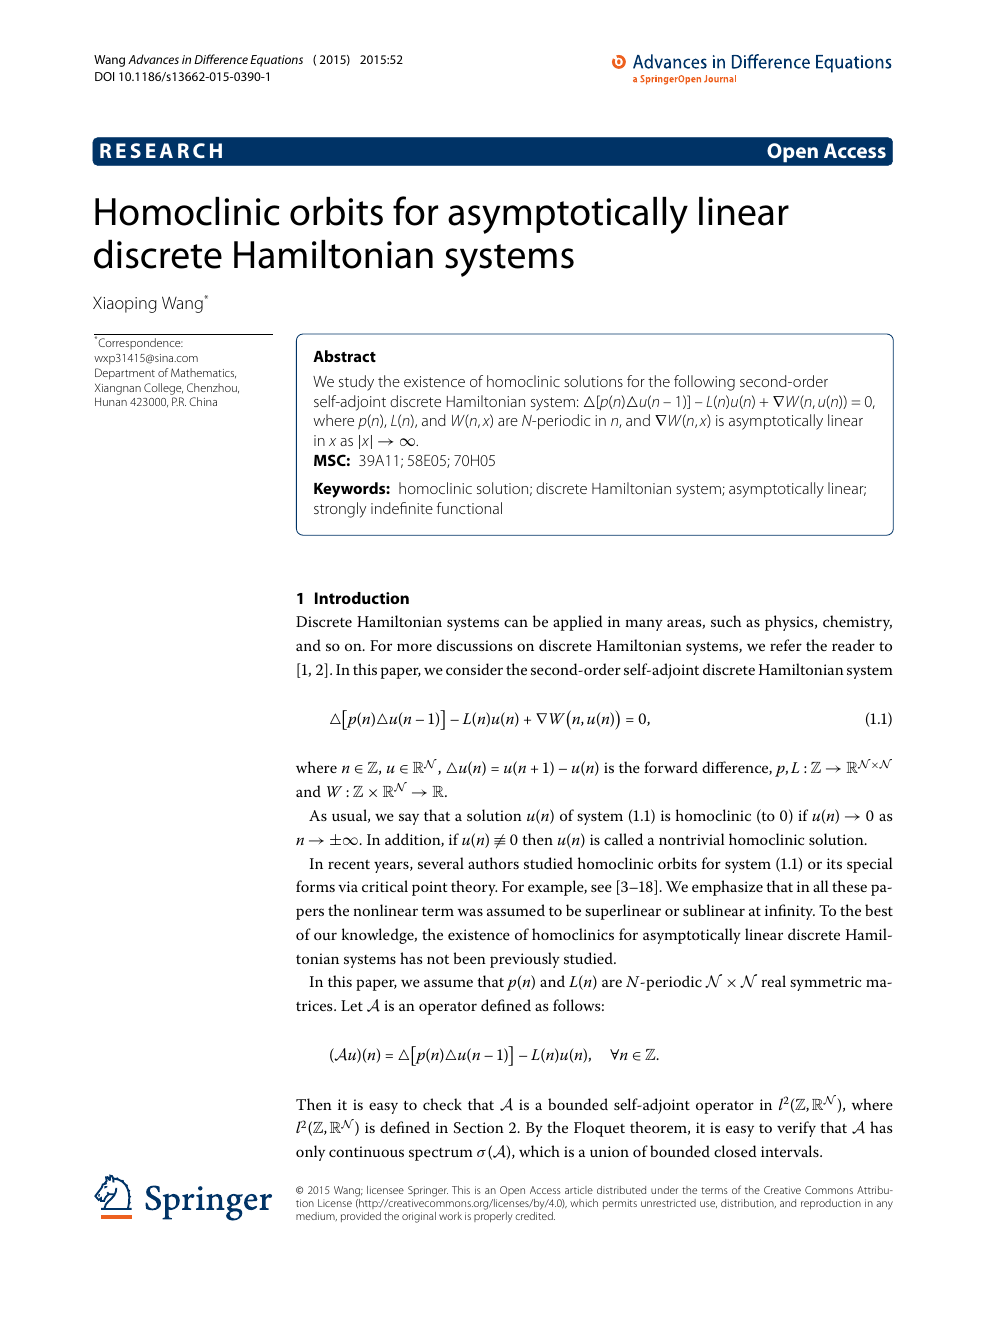 Homoclinic Orbits For Asymptotically Linear Discrete Hamiltonian Systems Topic Of Research Paper In Mathematics Download Scholarly Article Pdf And Read For Free On Cyberleninka Open Science Hub